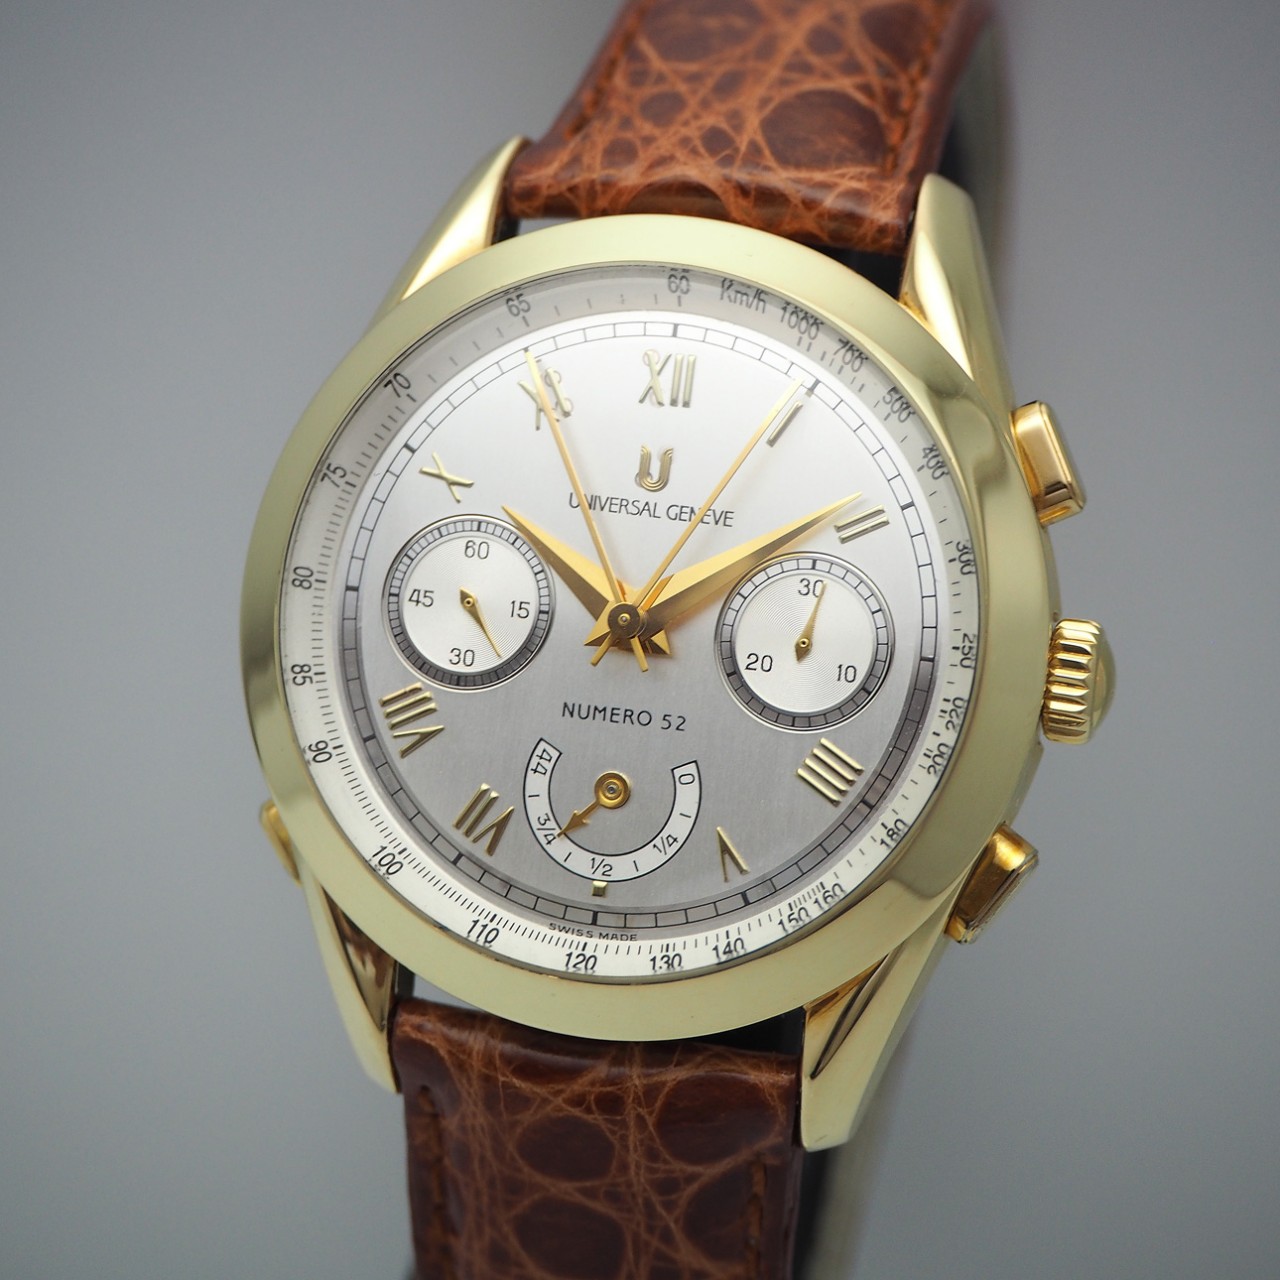 Universal Geneve Chronograph &quot;Master -Tech&quot; Rattrapante, Limited Edition 200 -Gold 18k/750